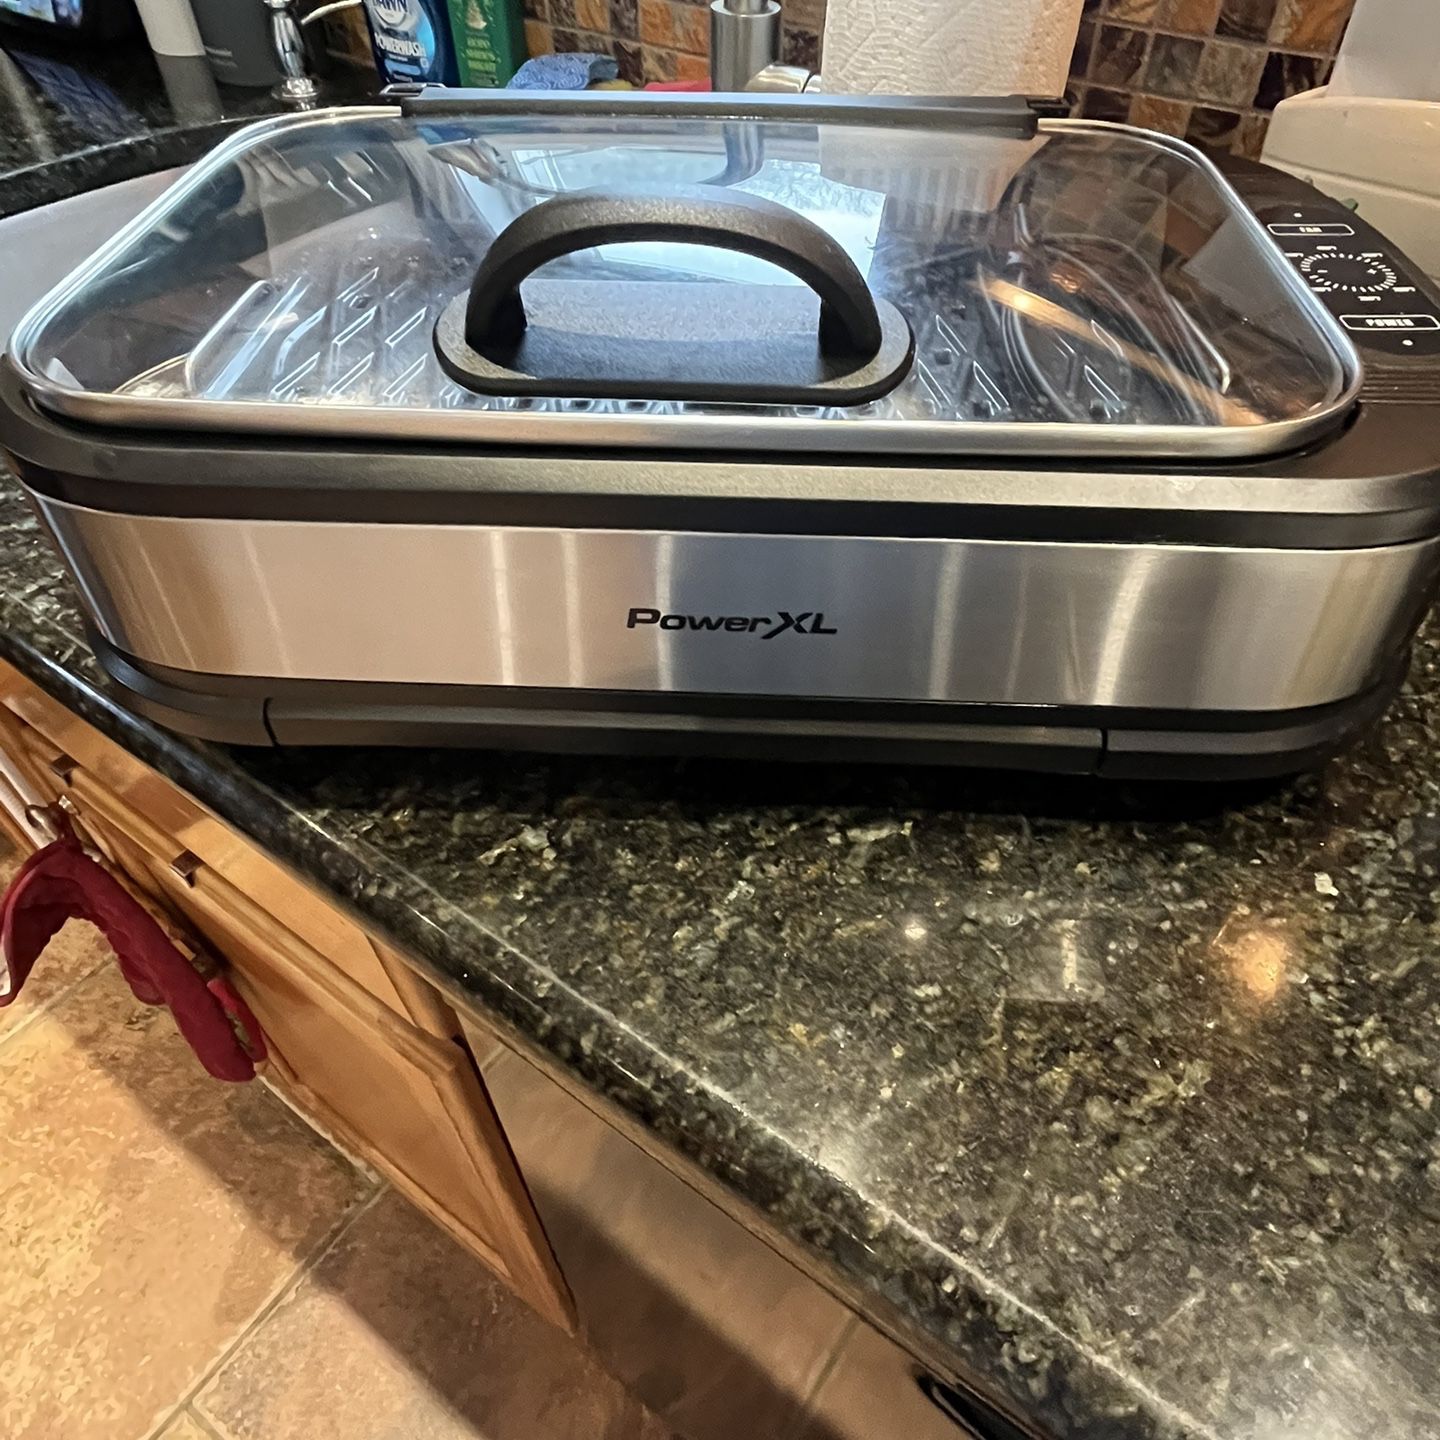 Power XL Smokeless Grill Pro for Sale in Ronkonkoma, NY - OfferUp